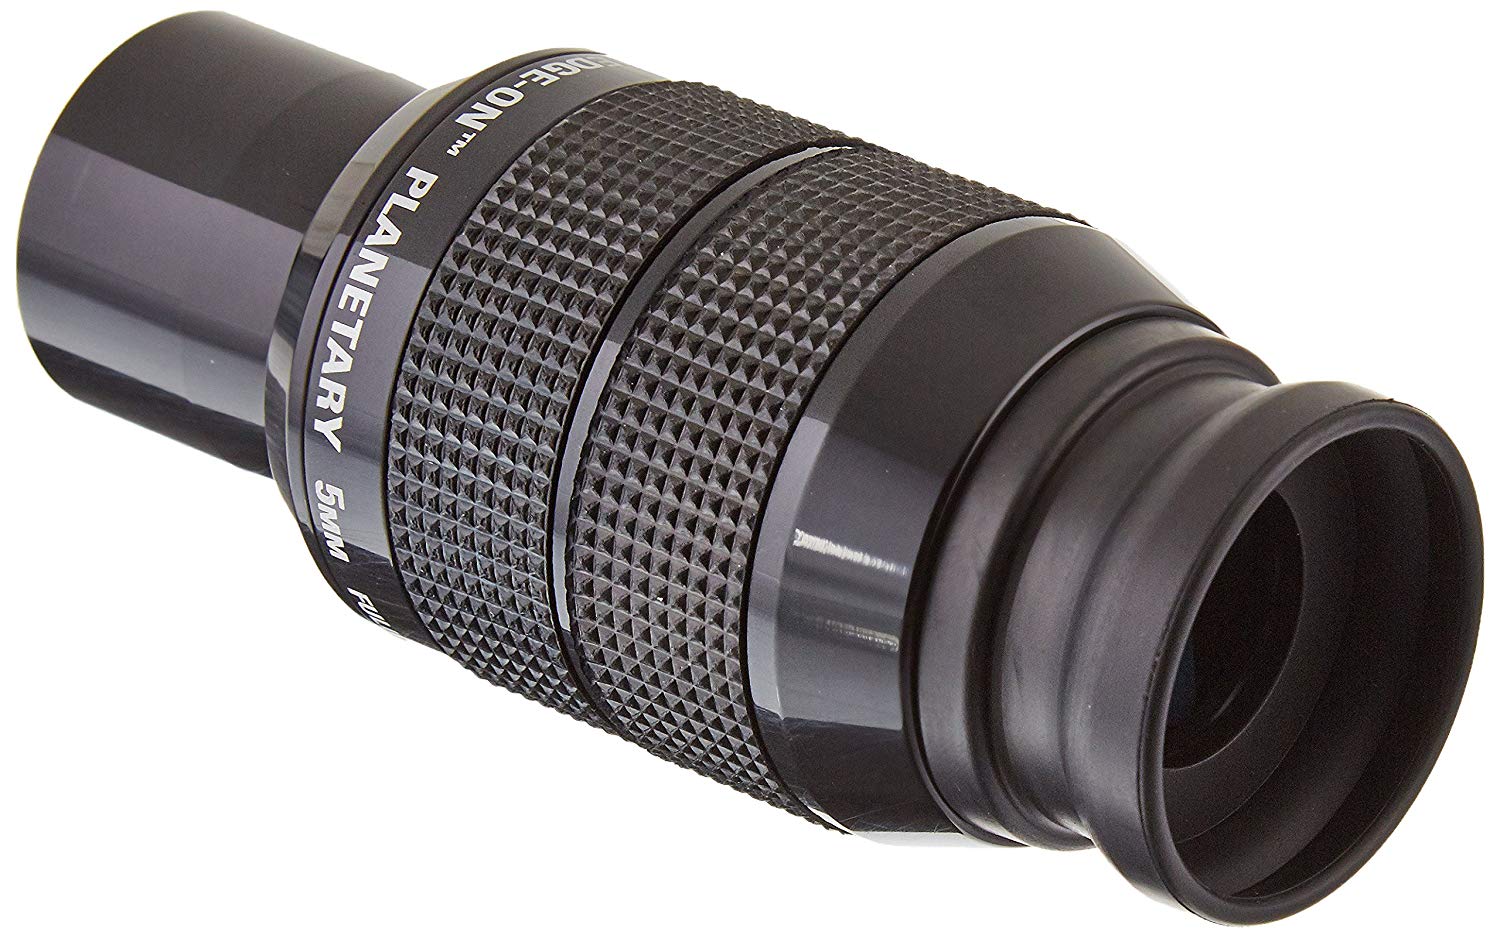 Best Telescope Eyepieces For Viewing Planets 2020